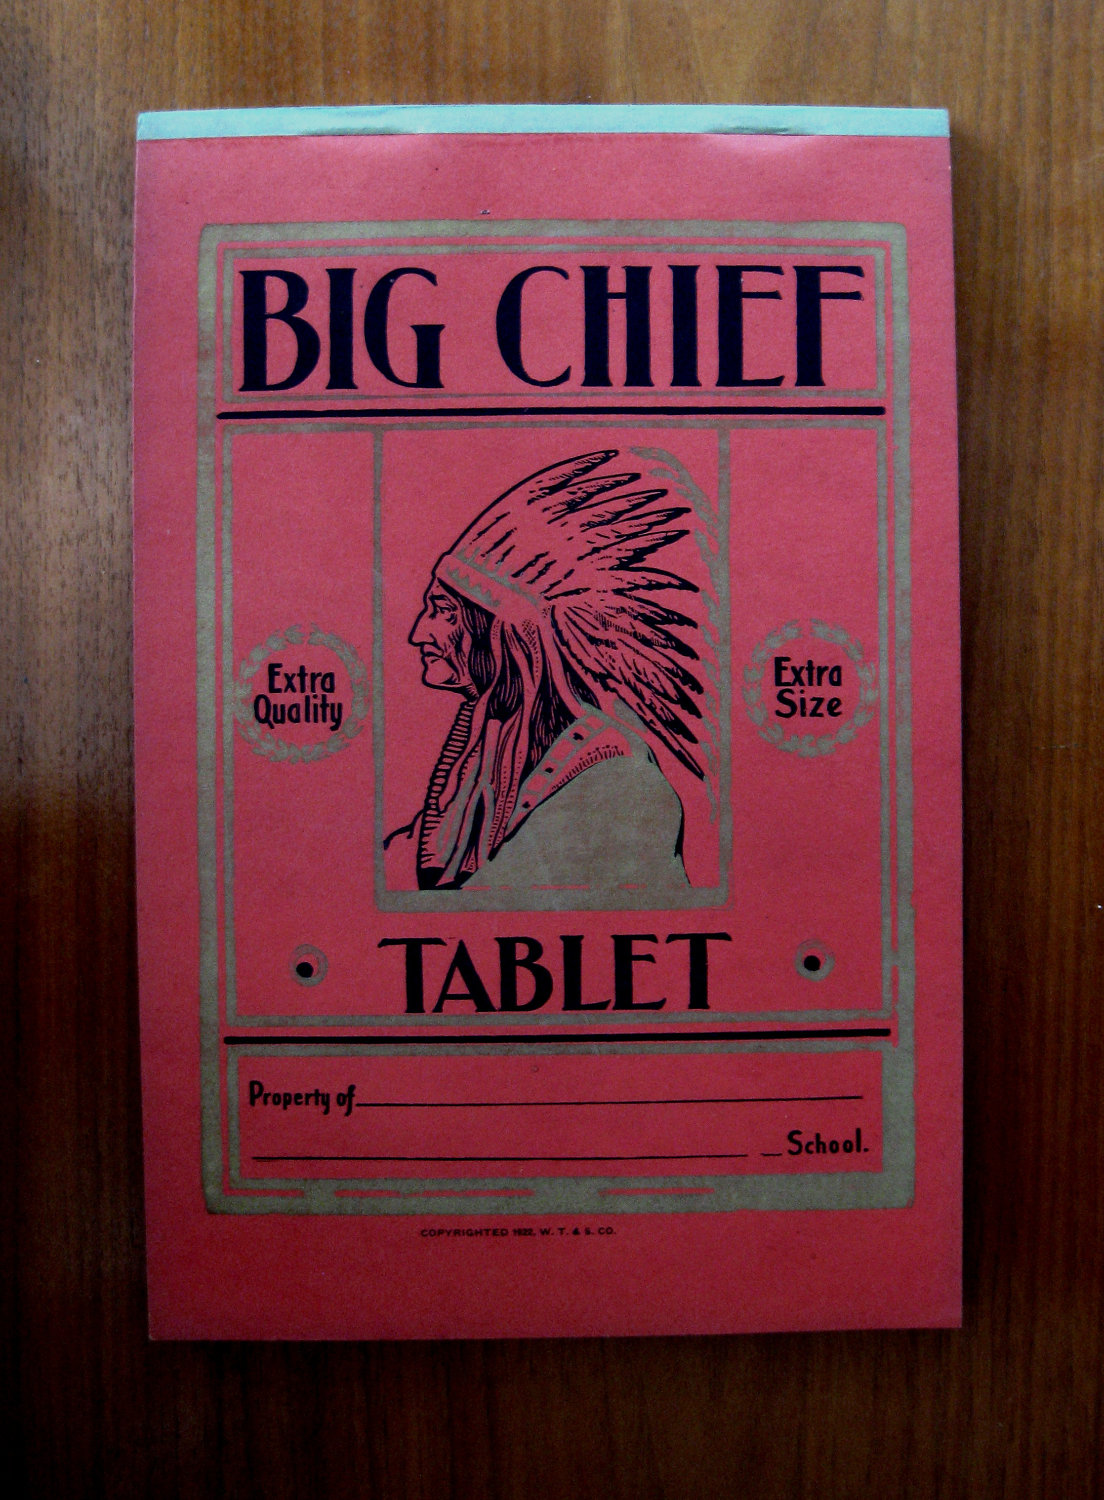 The Big Chief Tablet – I Remember JFK: A Baby Boomer's Pleasant Reminiscing  Spot